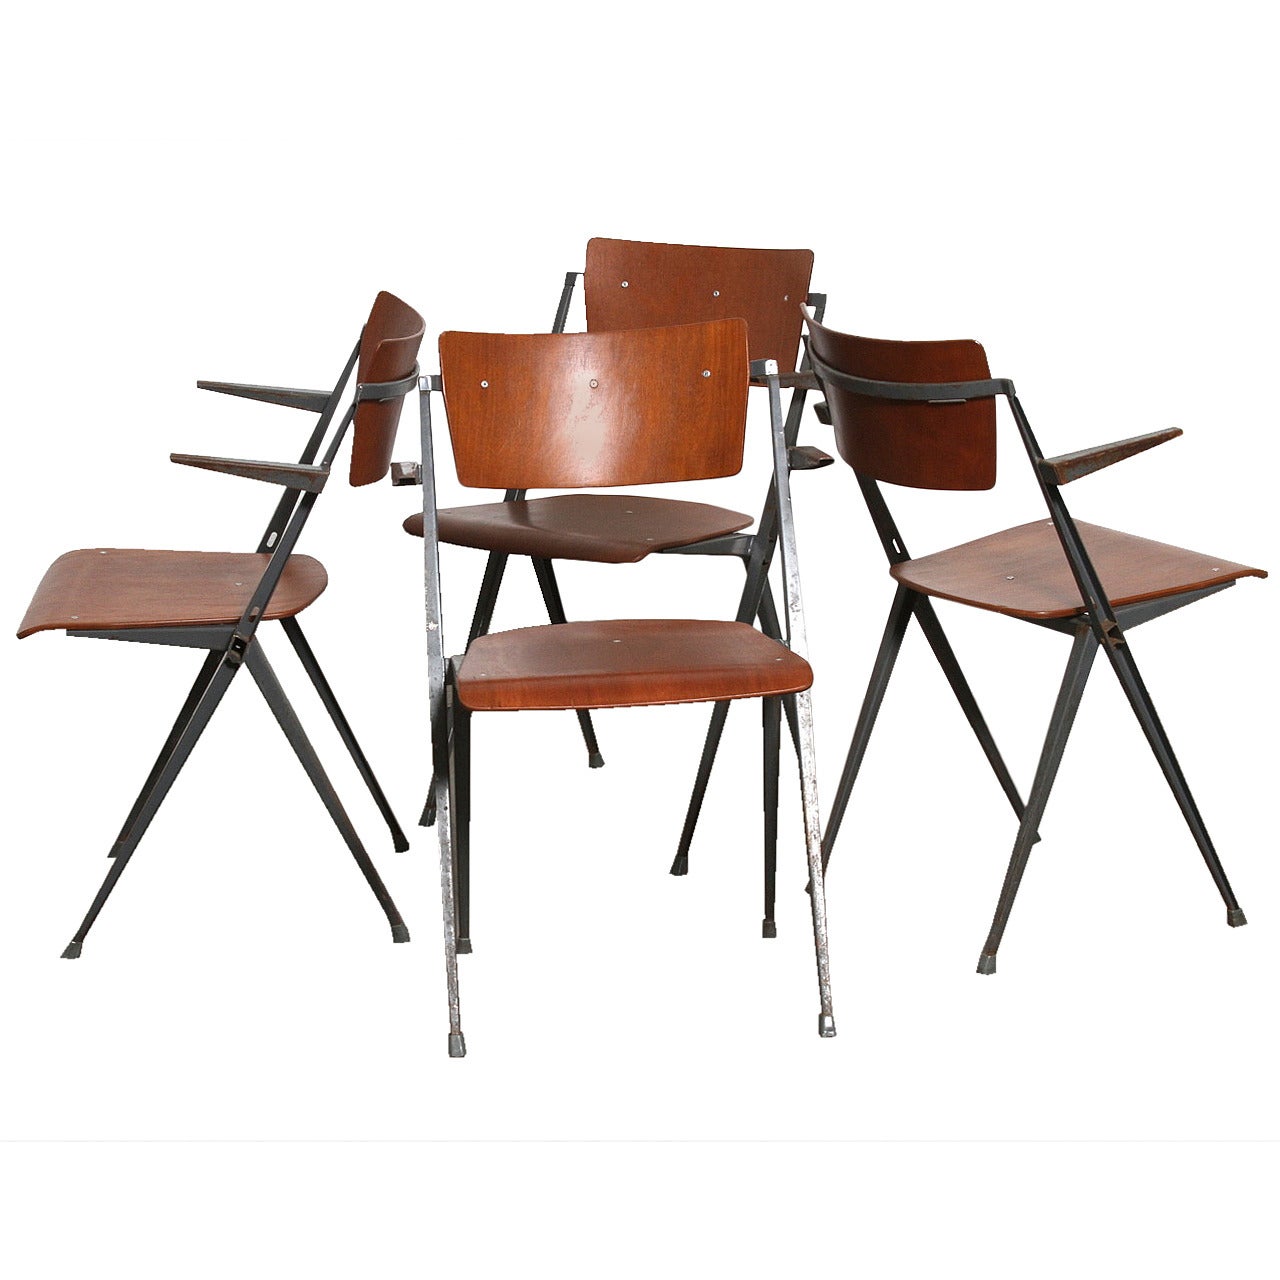 Set of 4 Wim Rietvled "Pyramid" Chairs for Ahrend de Cirkel